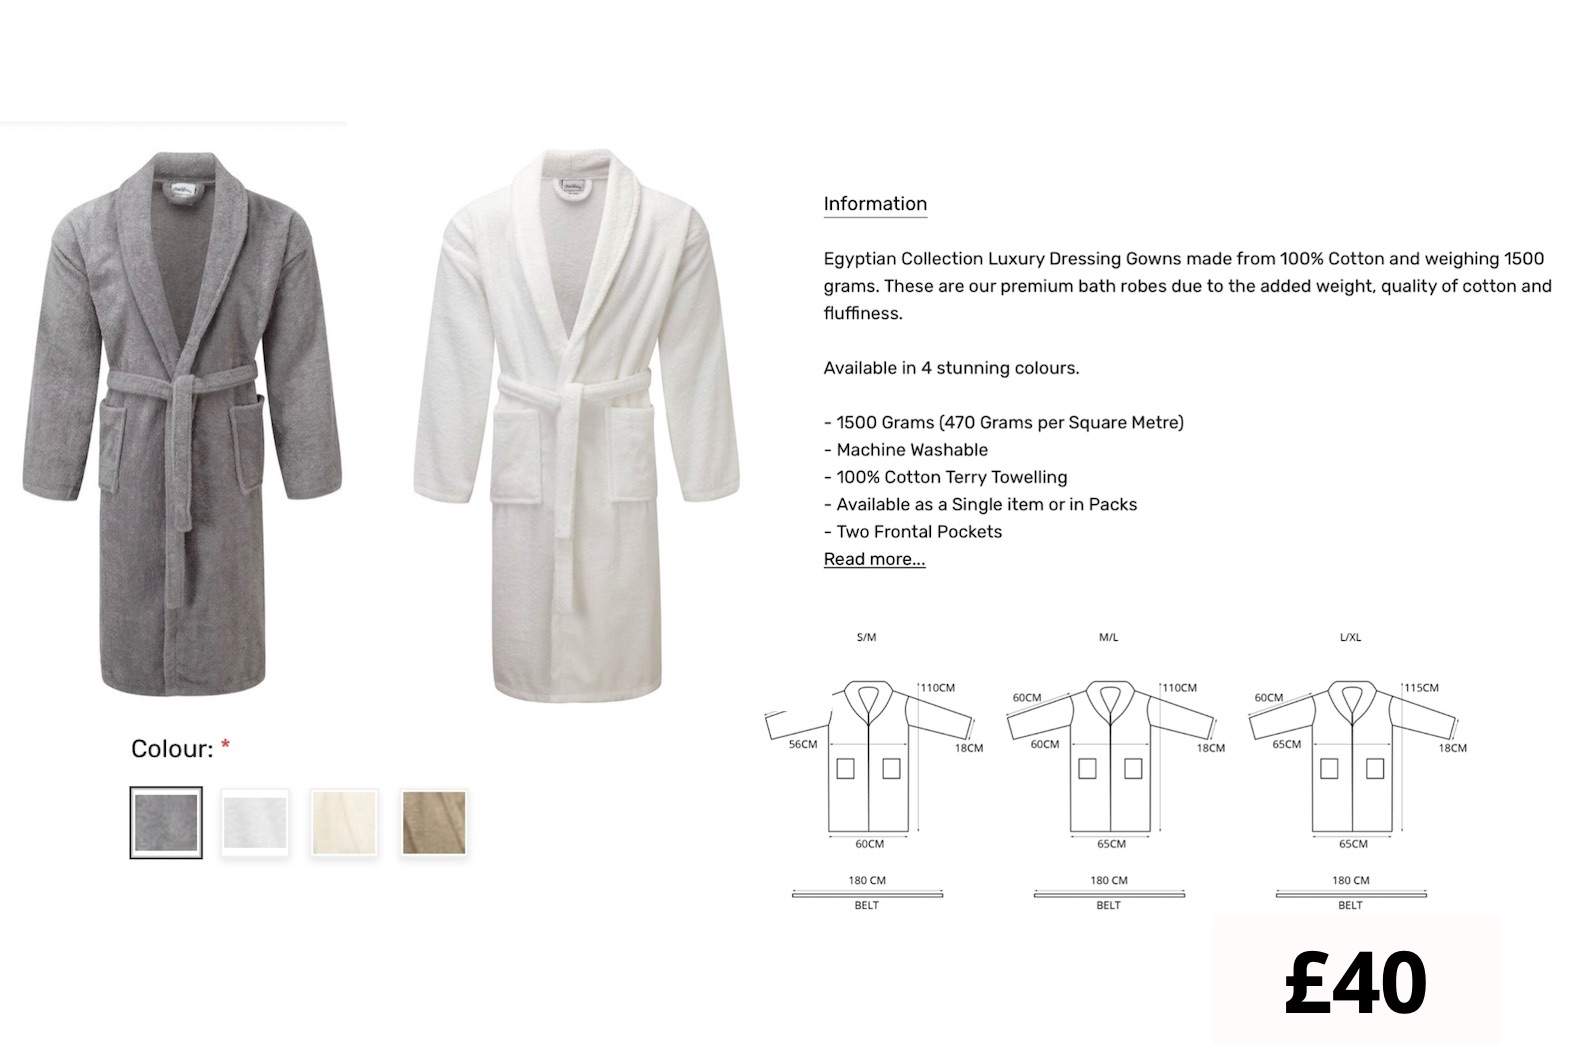 embroidery high quality dressing gown bath robe embroidery